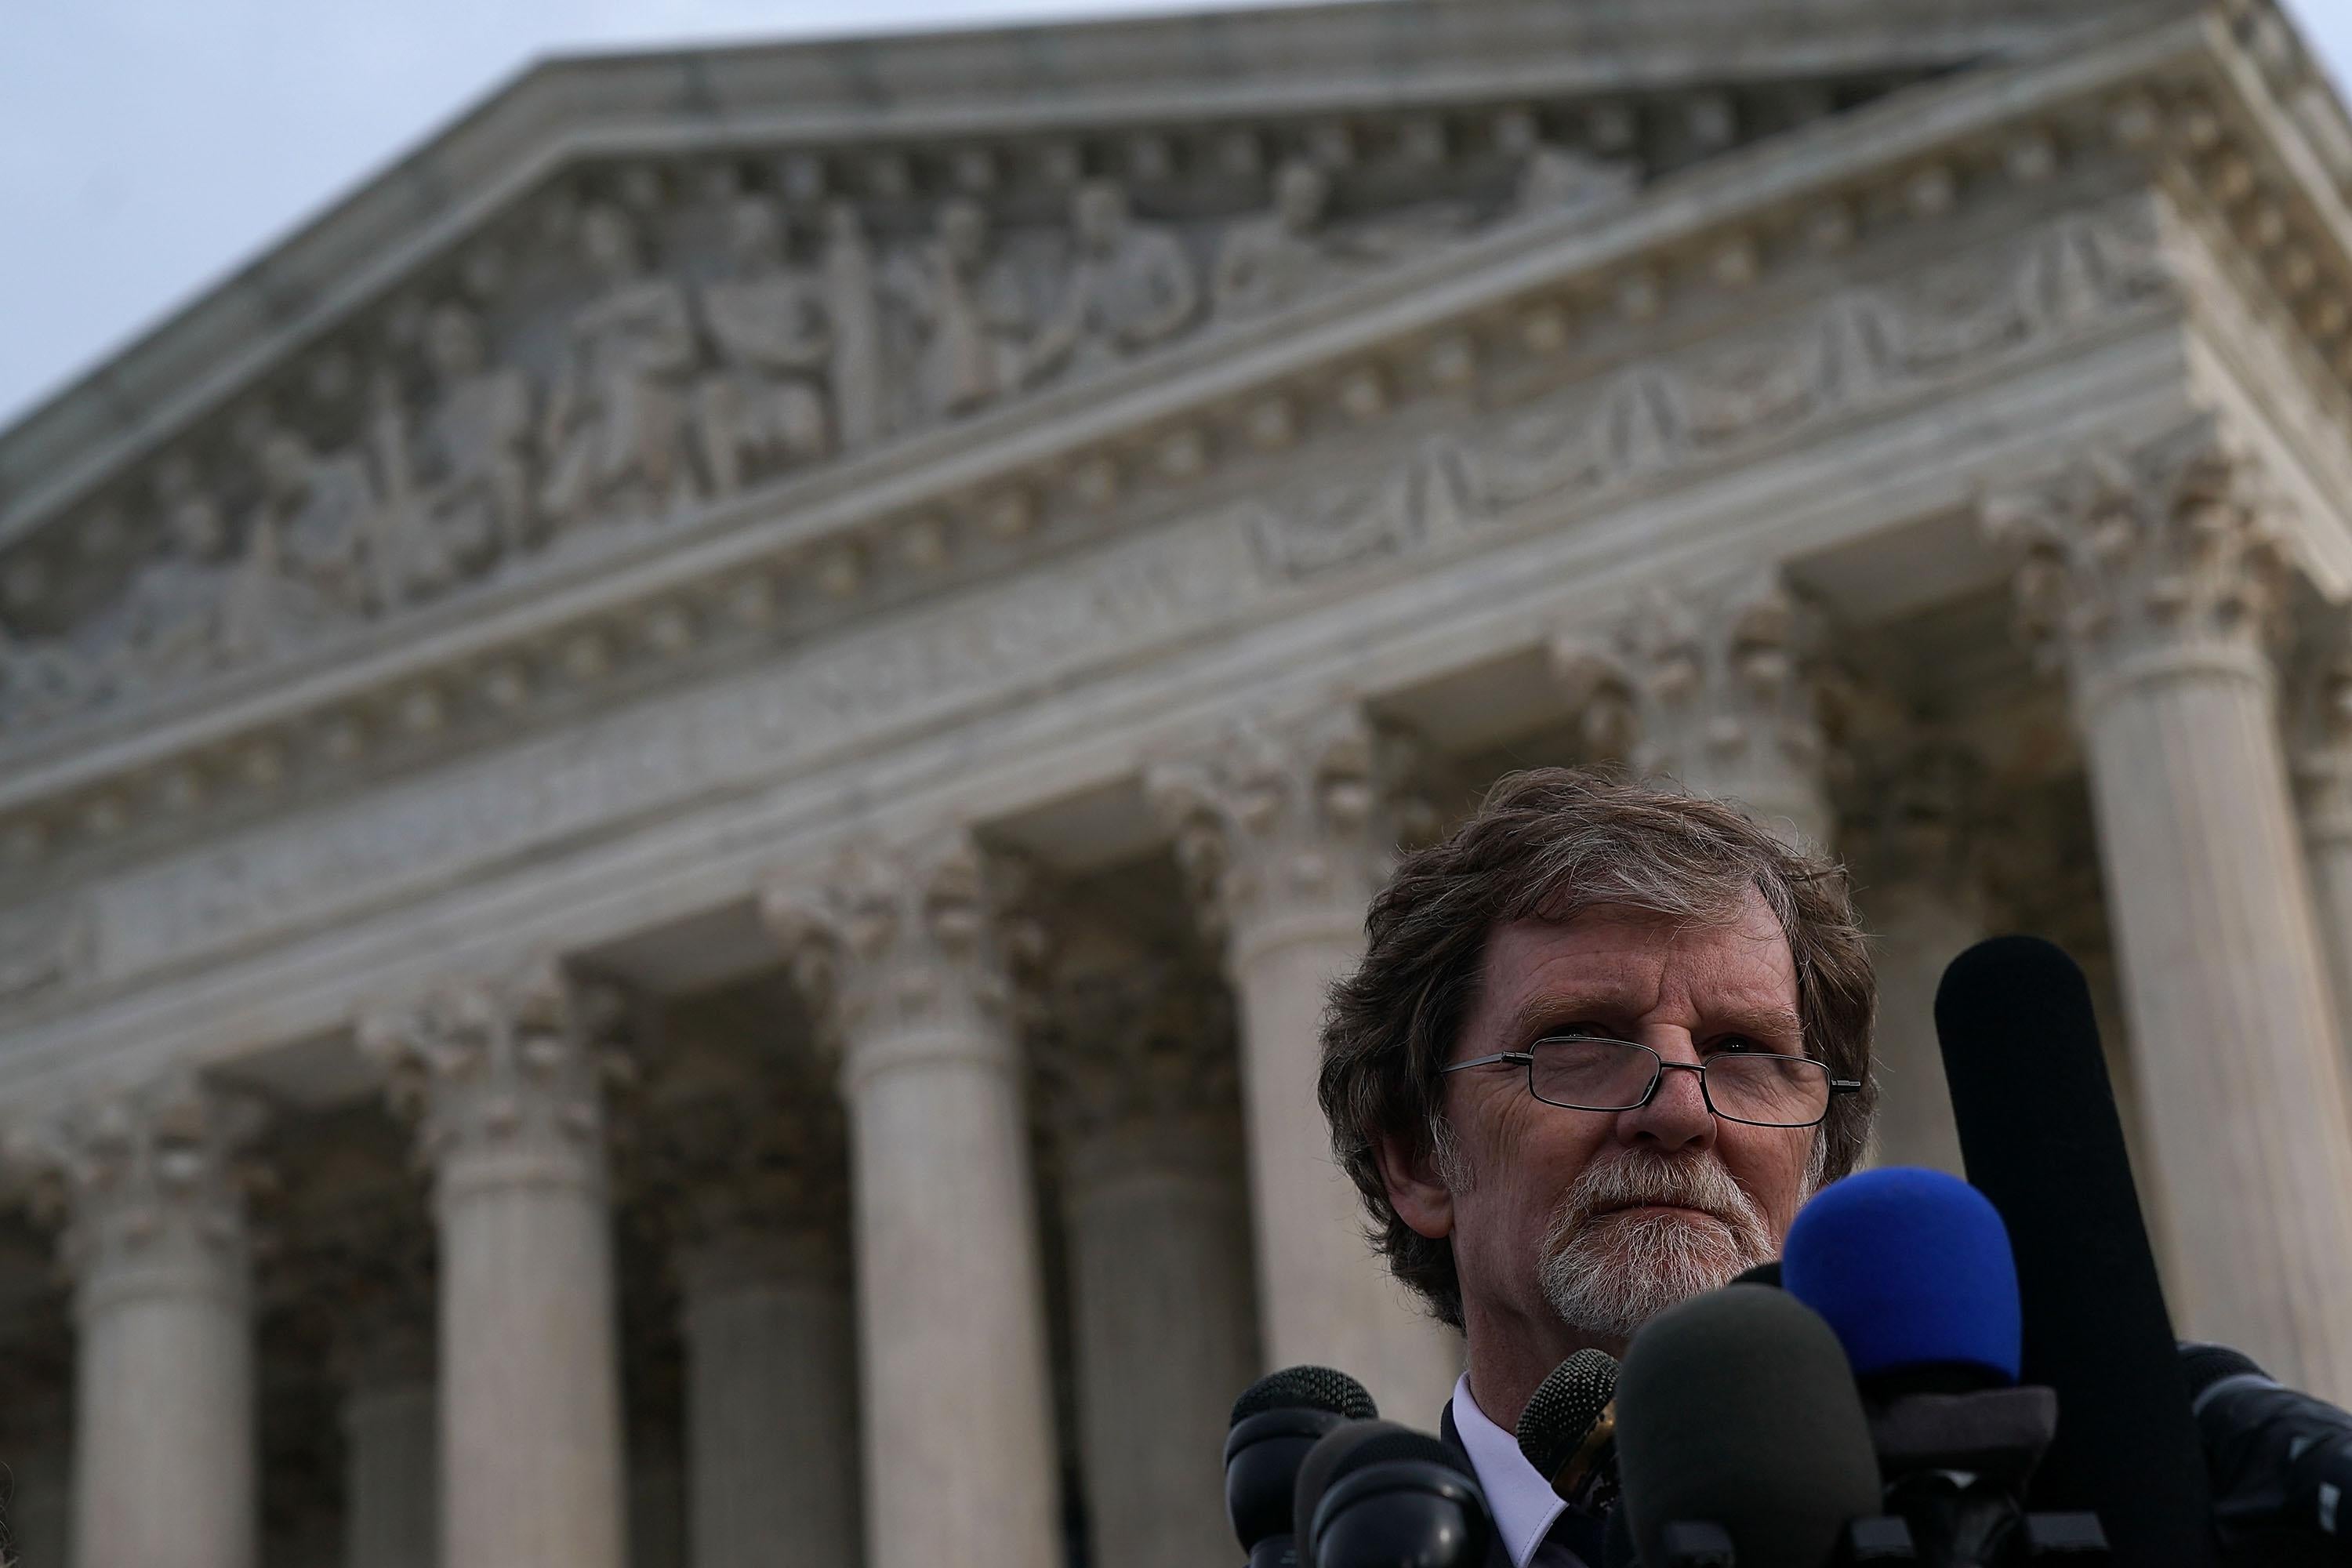 Masterpiece Cakeshop owner Jack Phillips speaks into microphones in front of the U.S. Supreme Court December 5, 2017 in Washington, DC. 